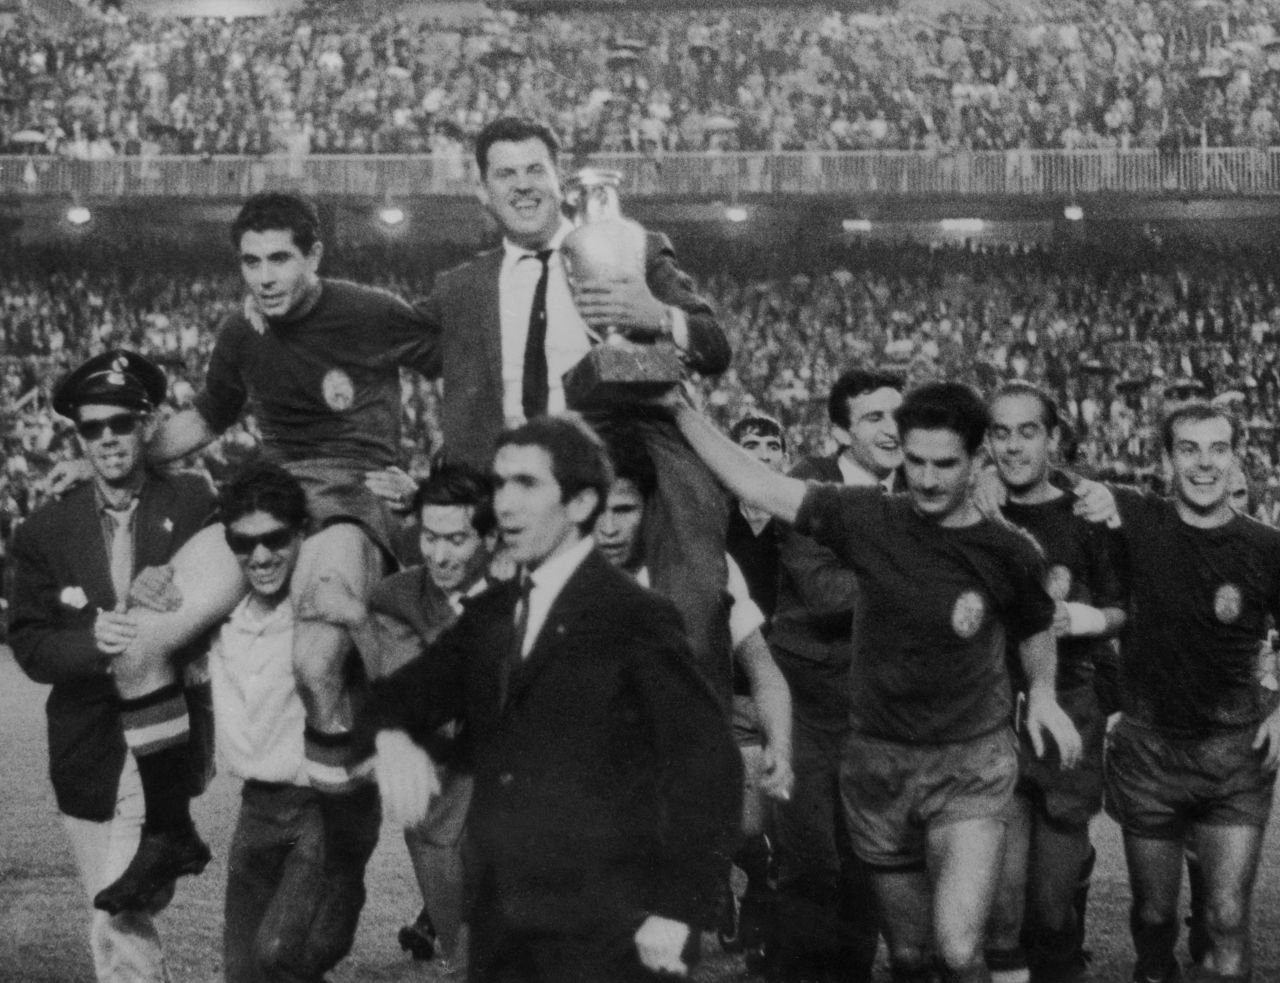 The Spanish football team bear their manager, Jose Villalonga, aloft to celebrate their victory in the 1964 European Nations Cup, when they beat the Soviet Union 2-1 at the Santiago Bernabeu.